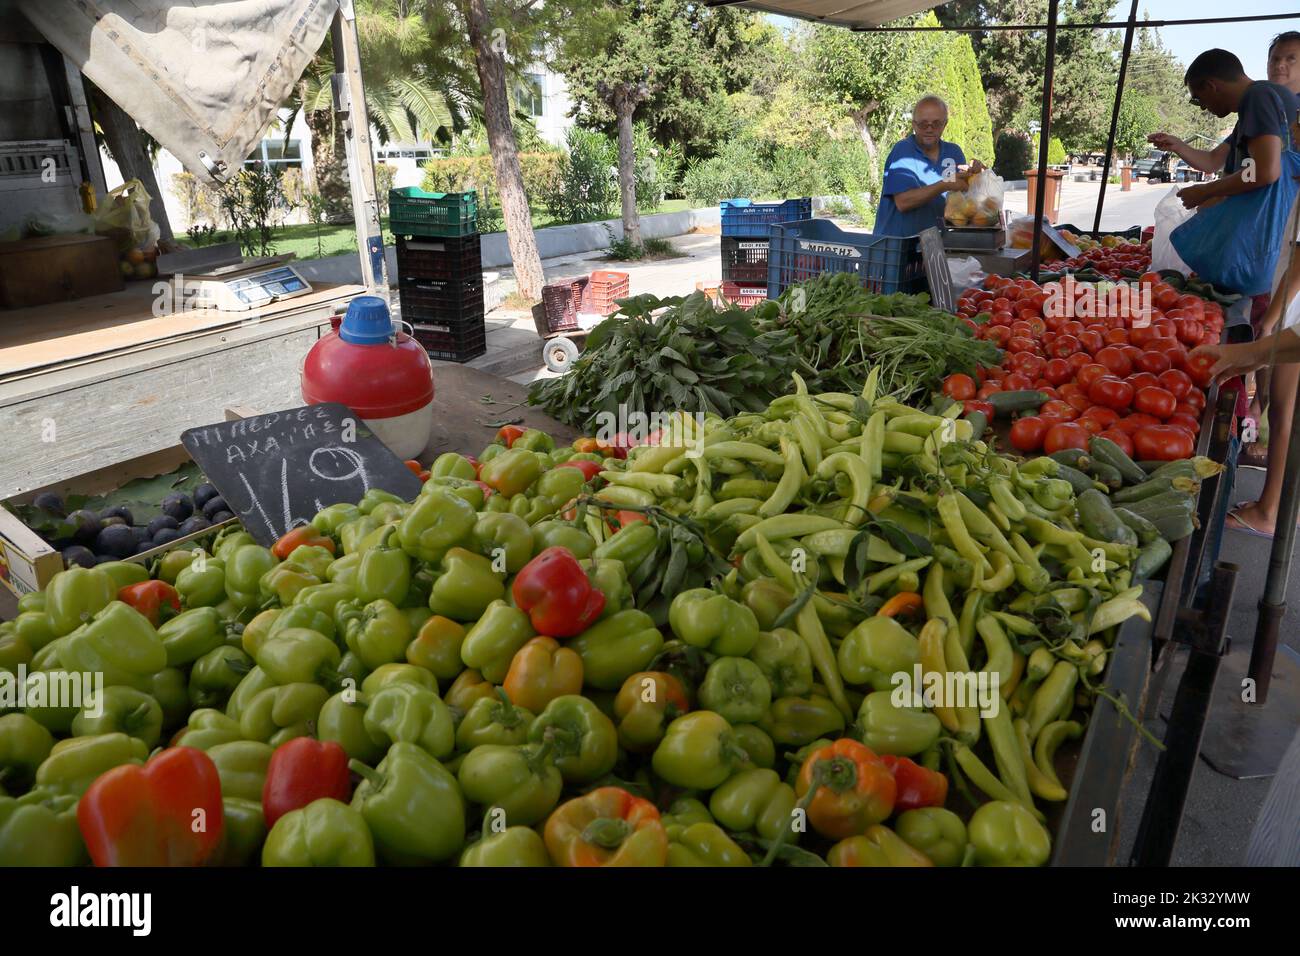 People Shopping at Saturday Market Buying Peppers and Tomatoes Vouliagmeni Athens Greece Stock Photo